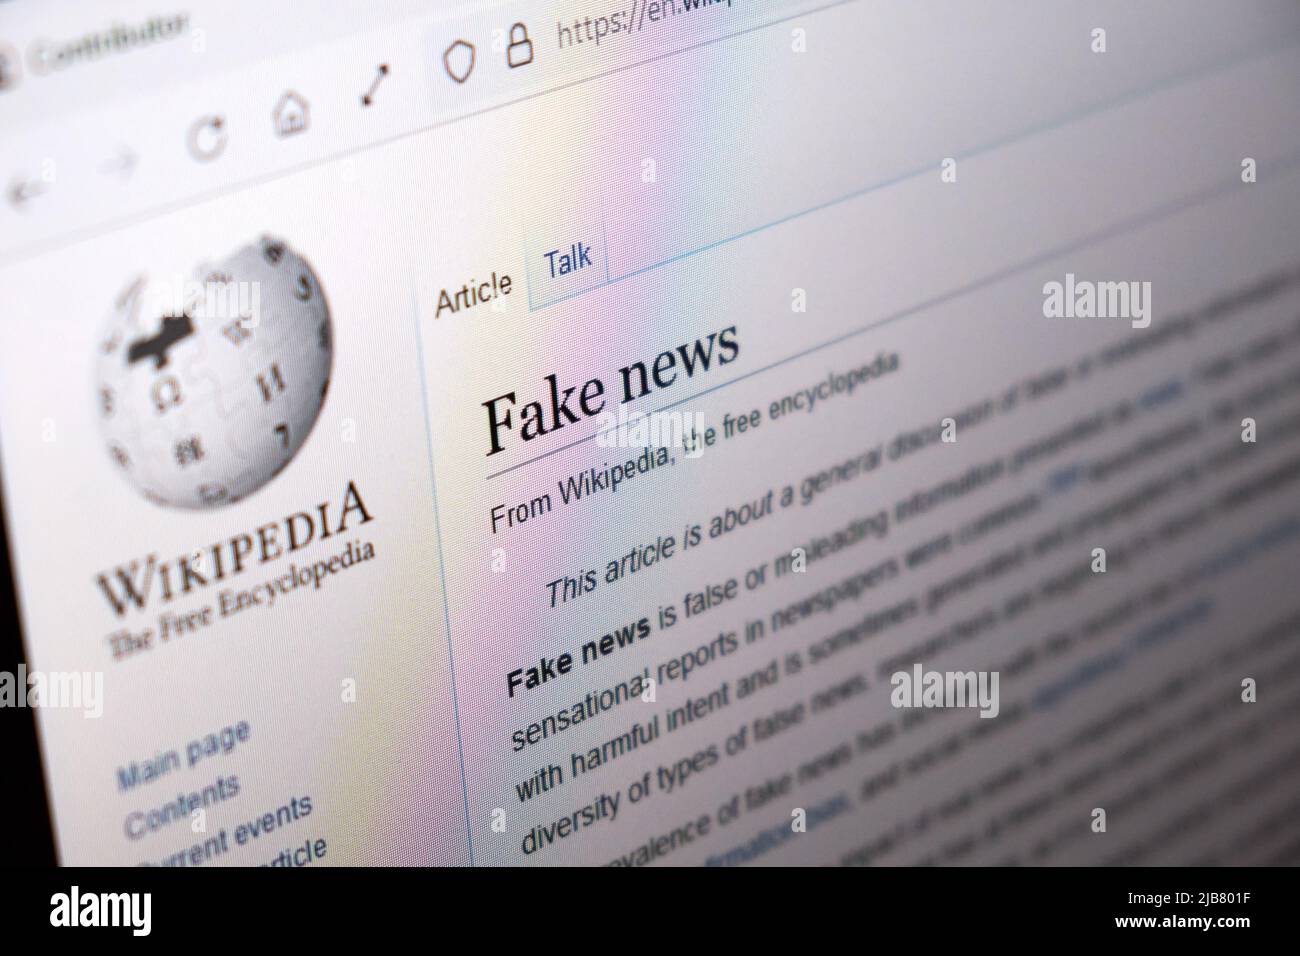 Valencia, spain - June 1, 2022: Screenshot of the entry on fake news in the collaborative portal Wikipedia. Stock Photo